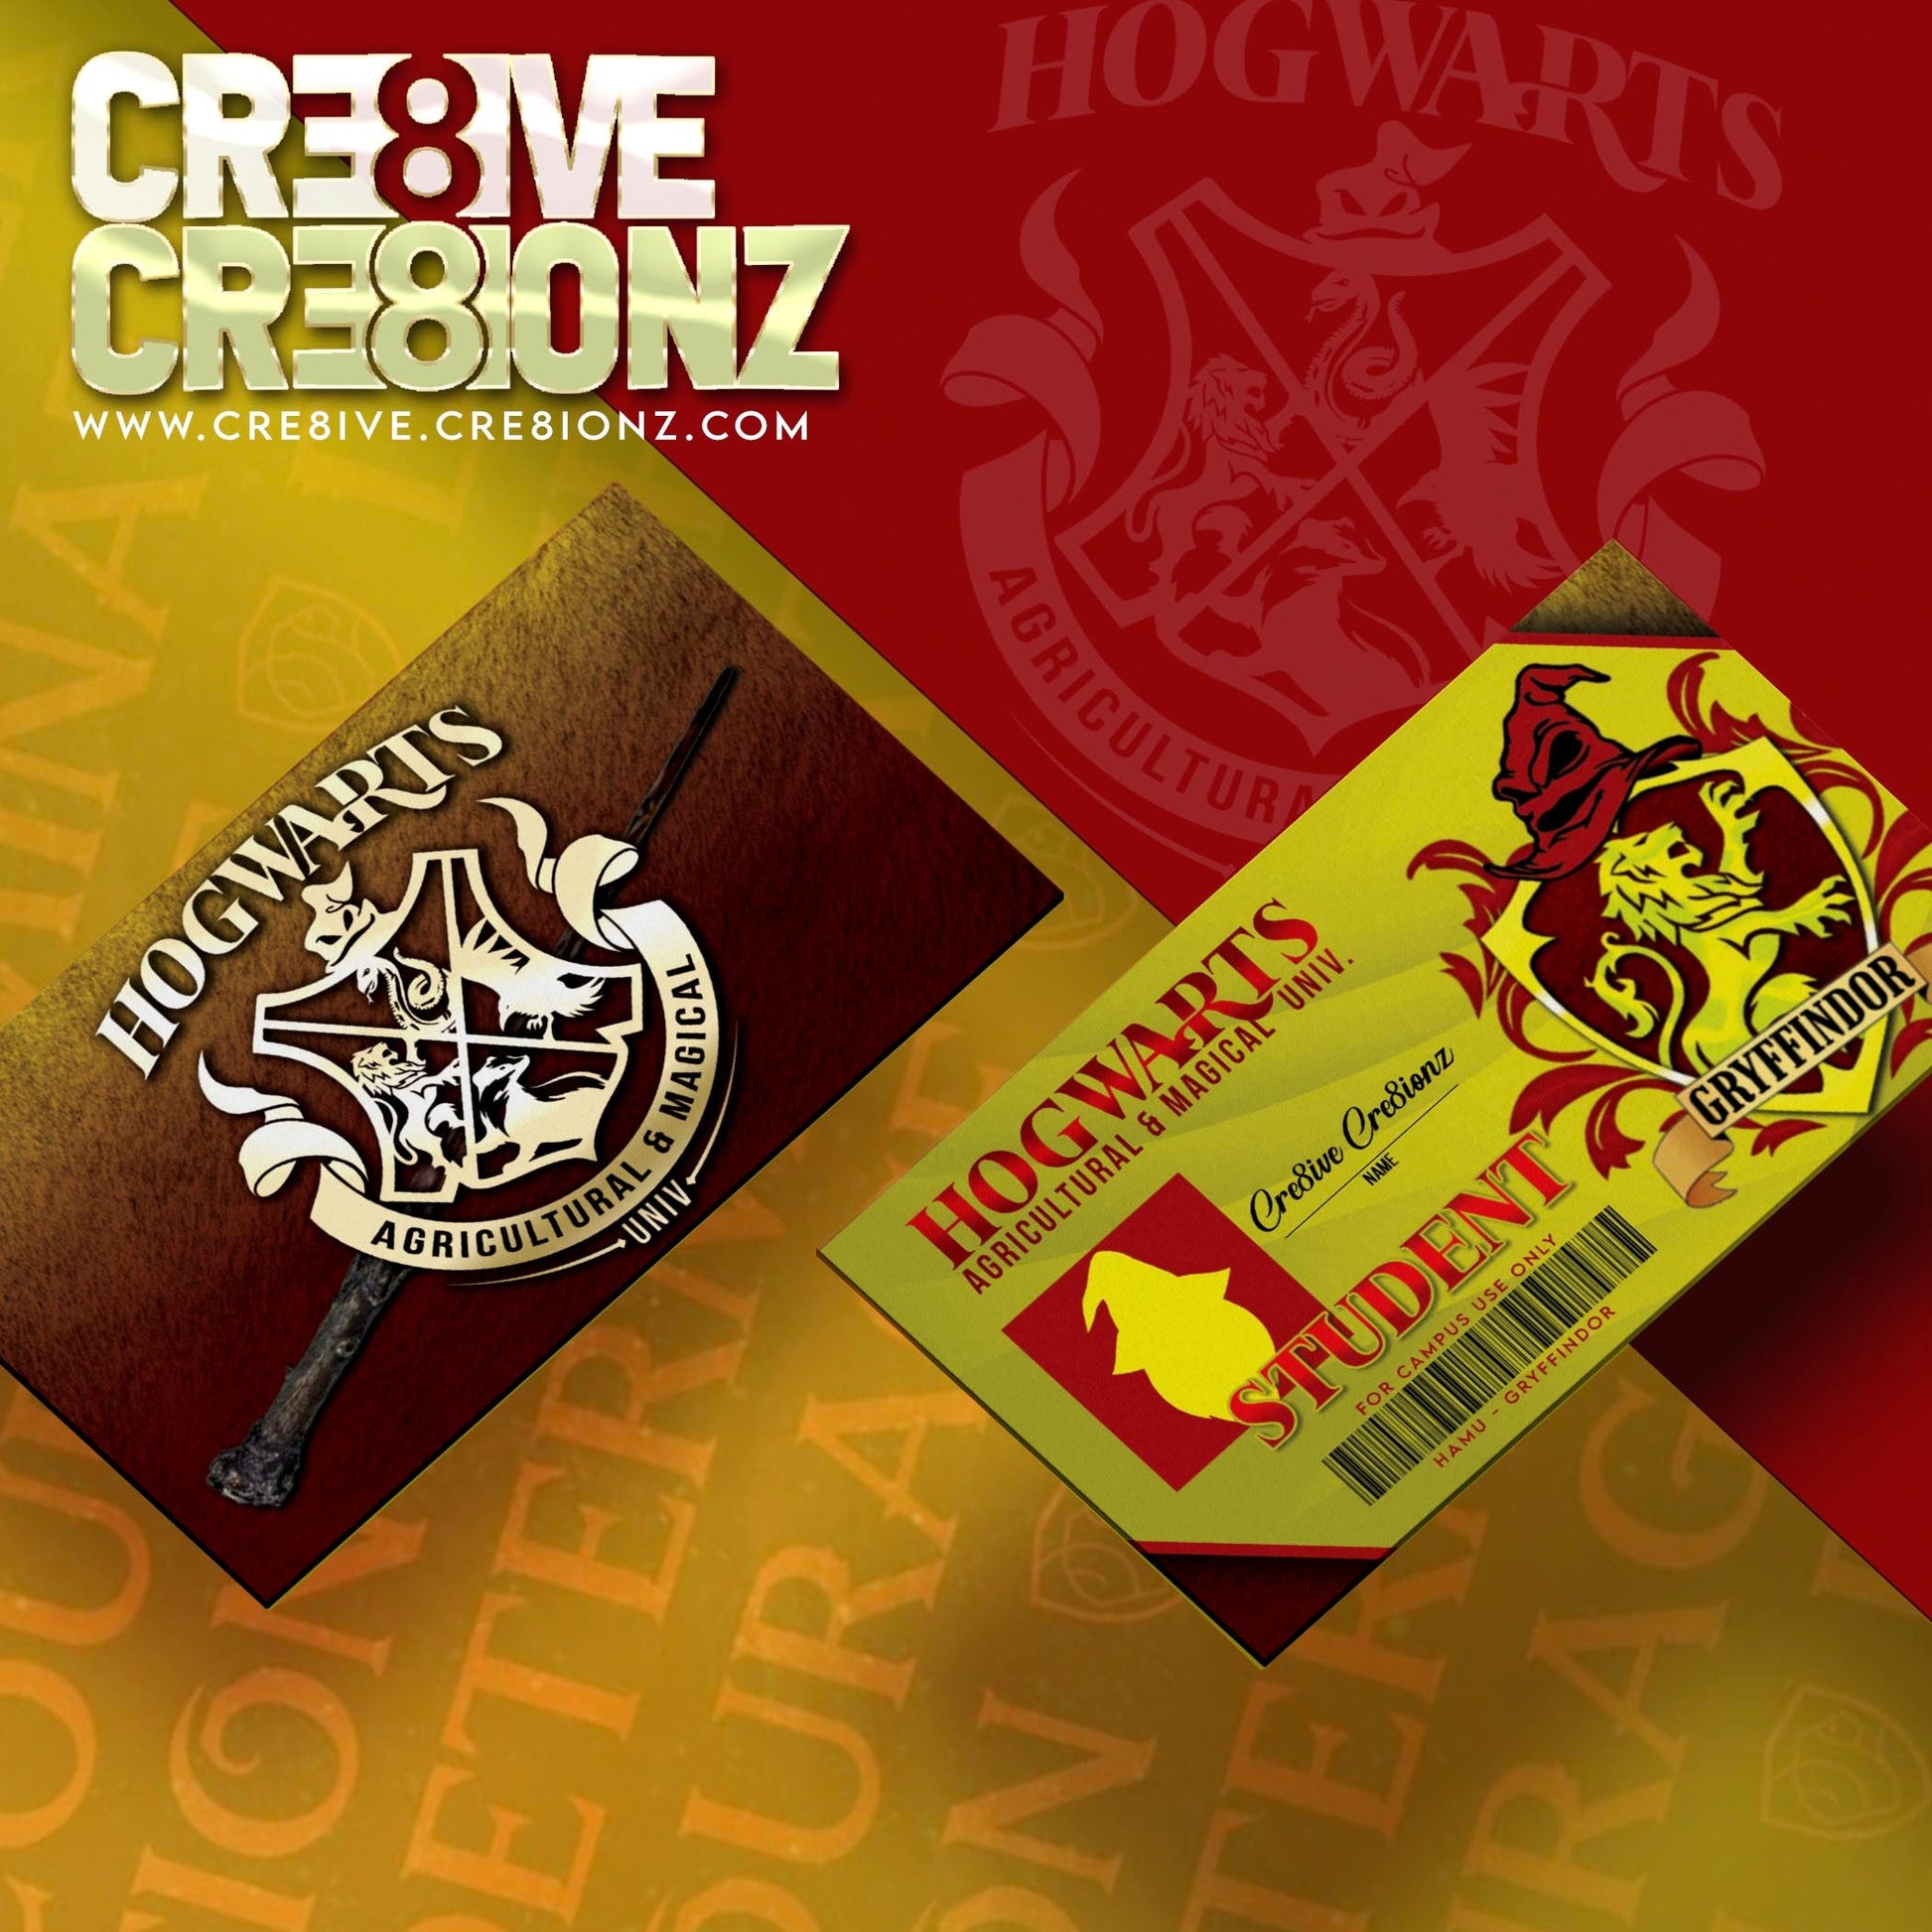 HAMU Student IDs - Cre8ive Cre8ionz